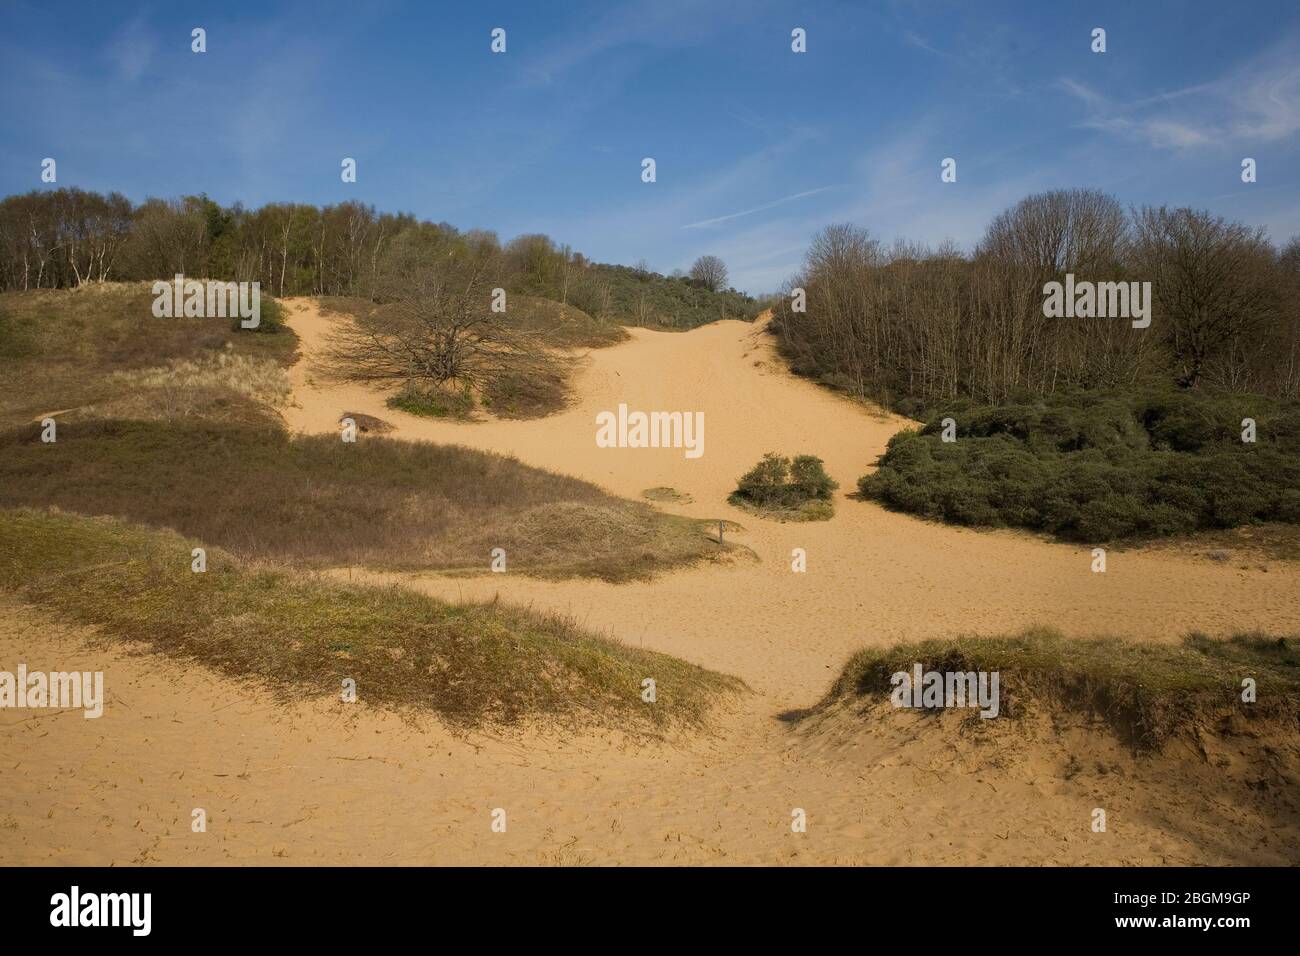 sand dunes partly covered in grass with trees in distance in Merthyr Mawr nature reserve Stock Photo